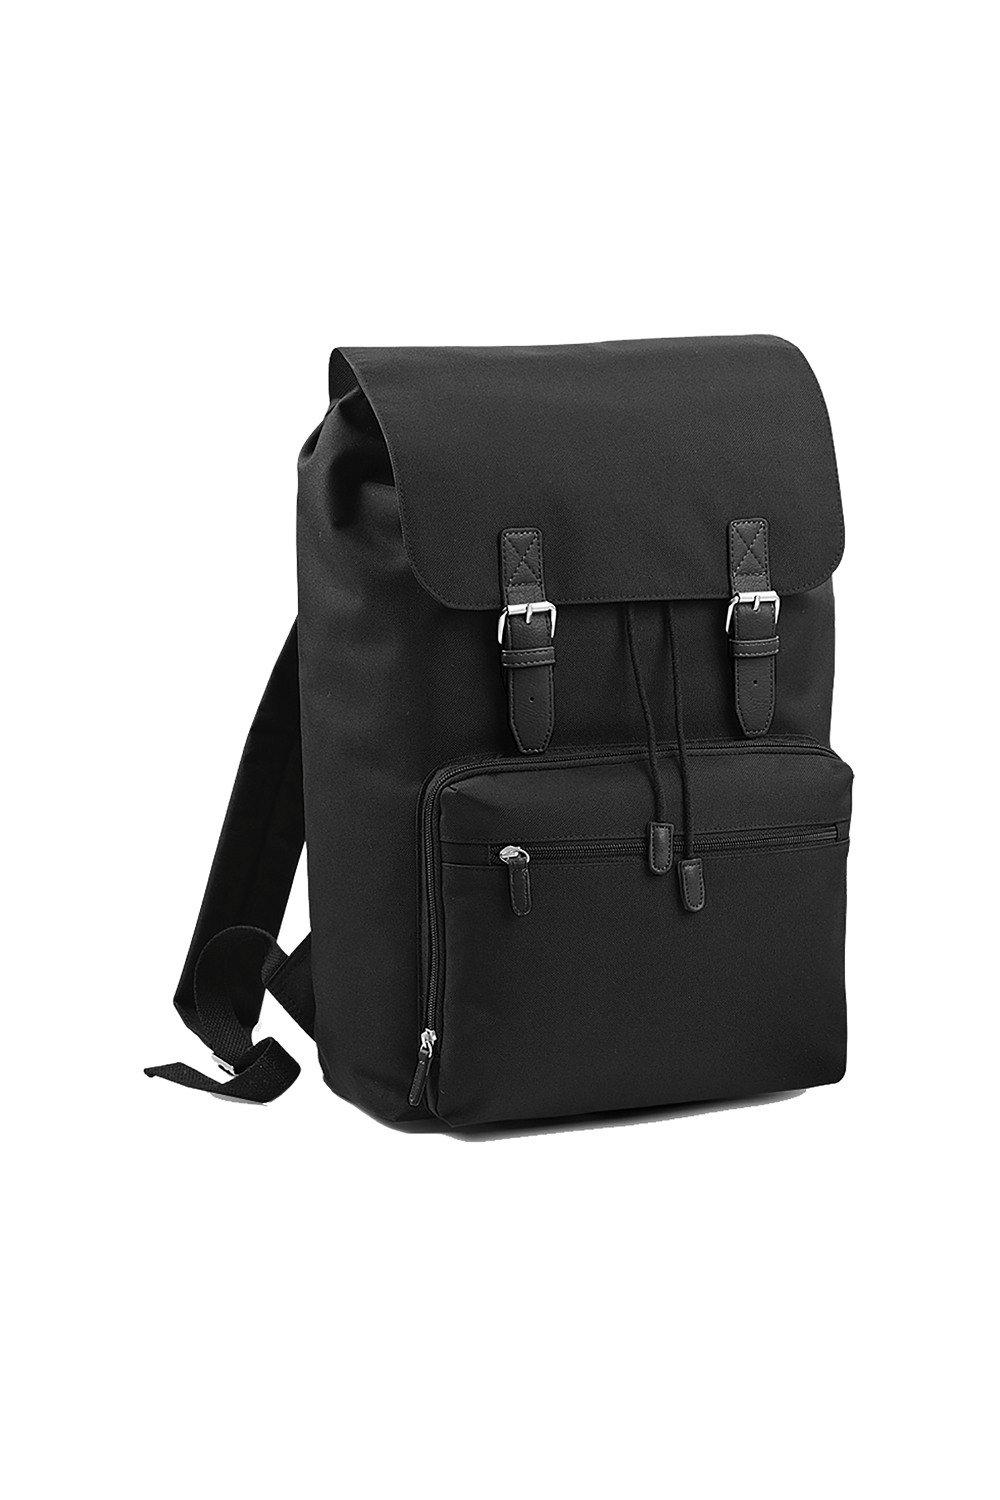 Heritage Laptop Backpack Bag (Up To 17inch Laptop) (Pack of 2)